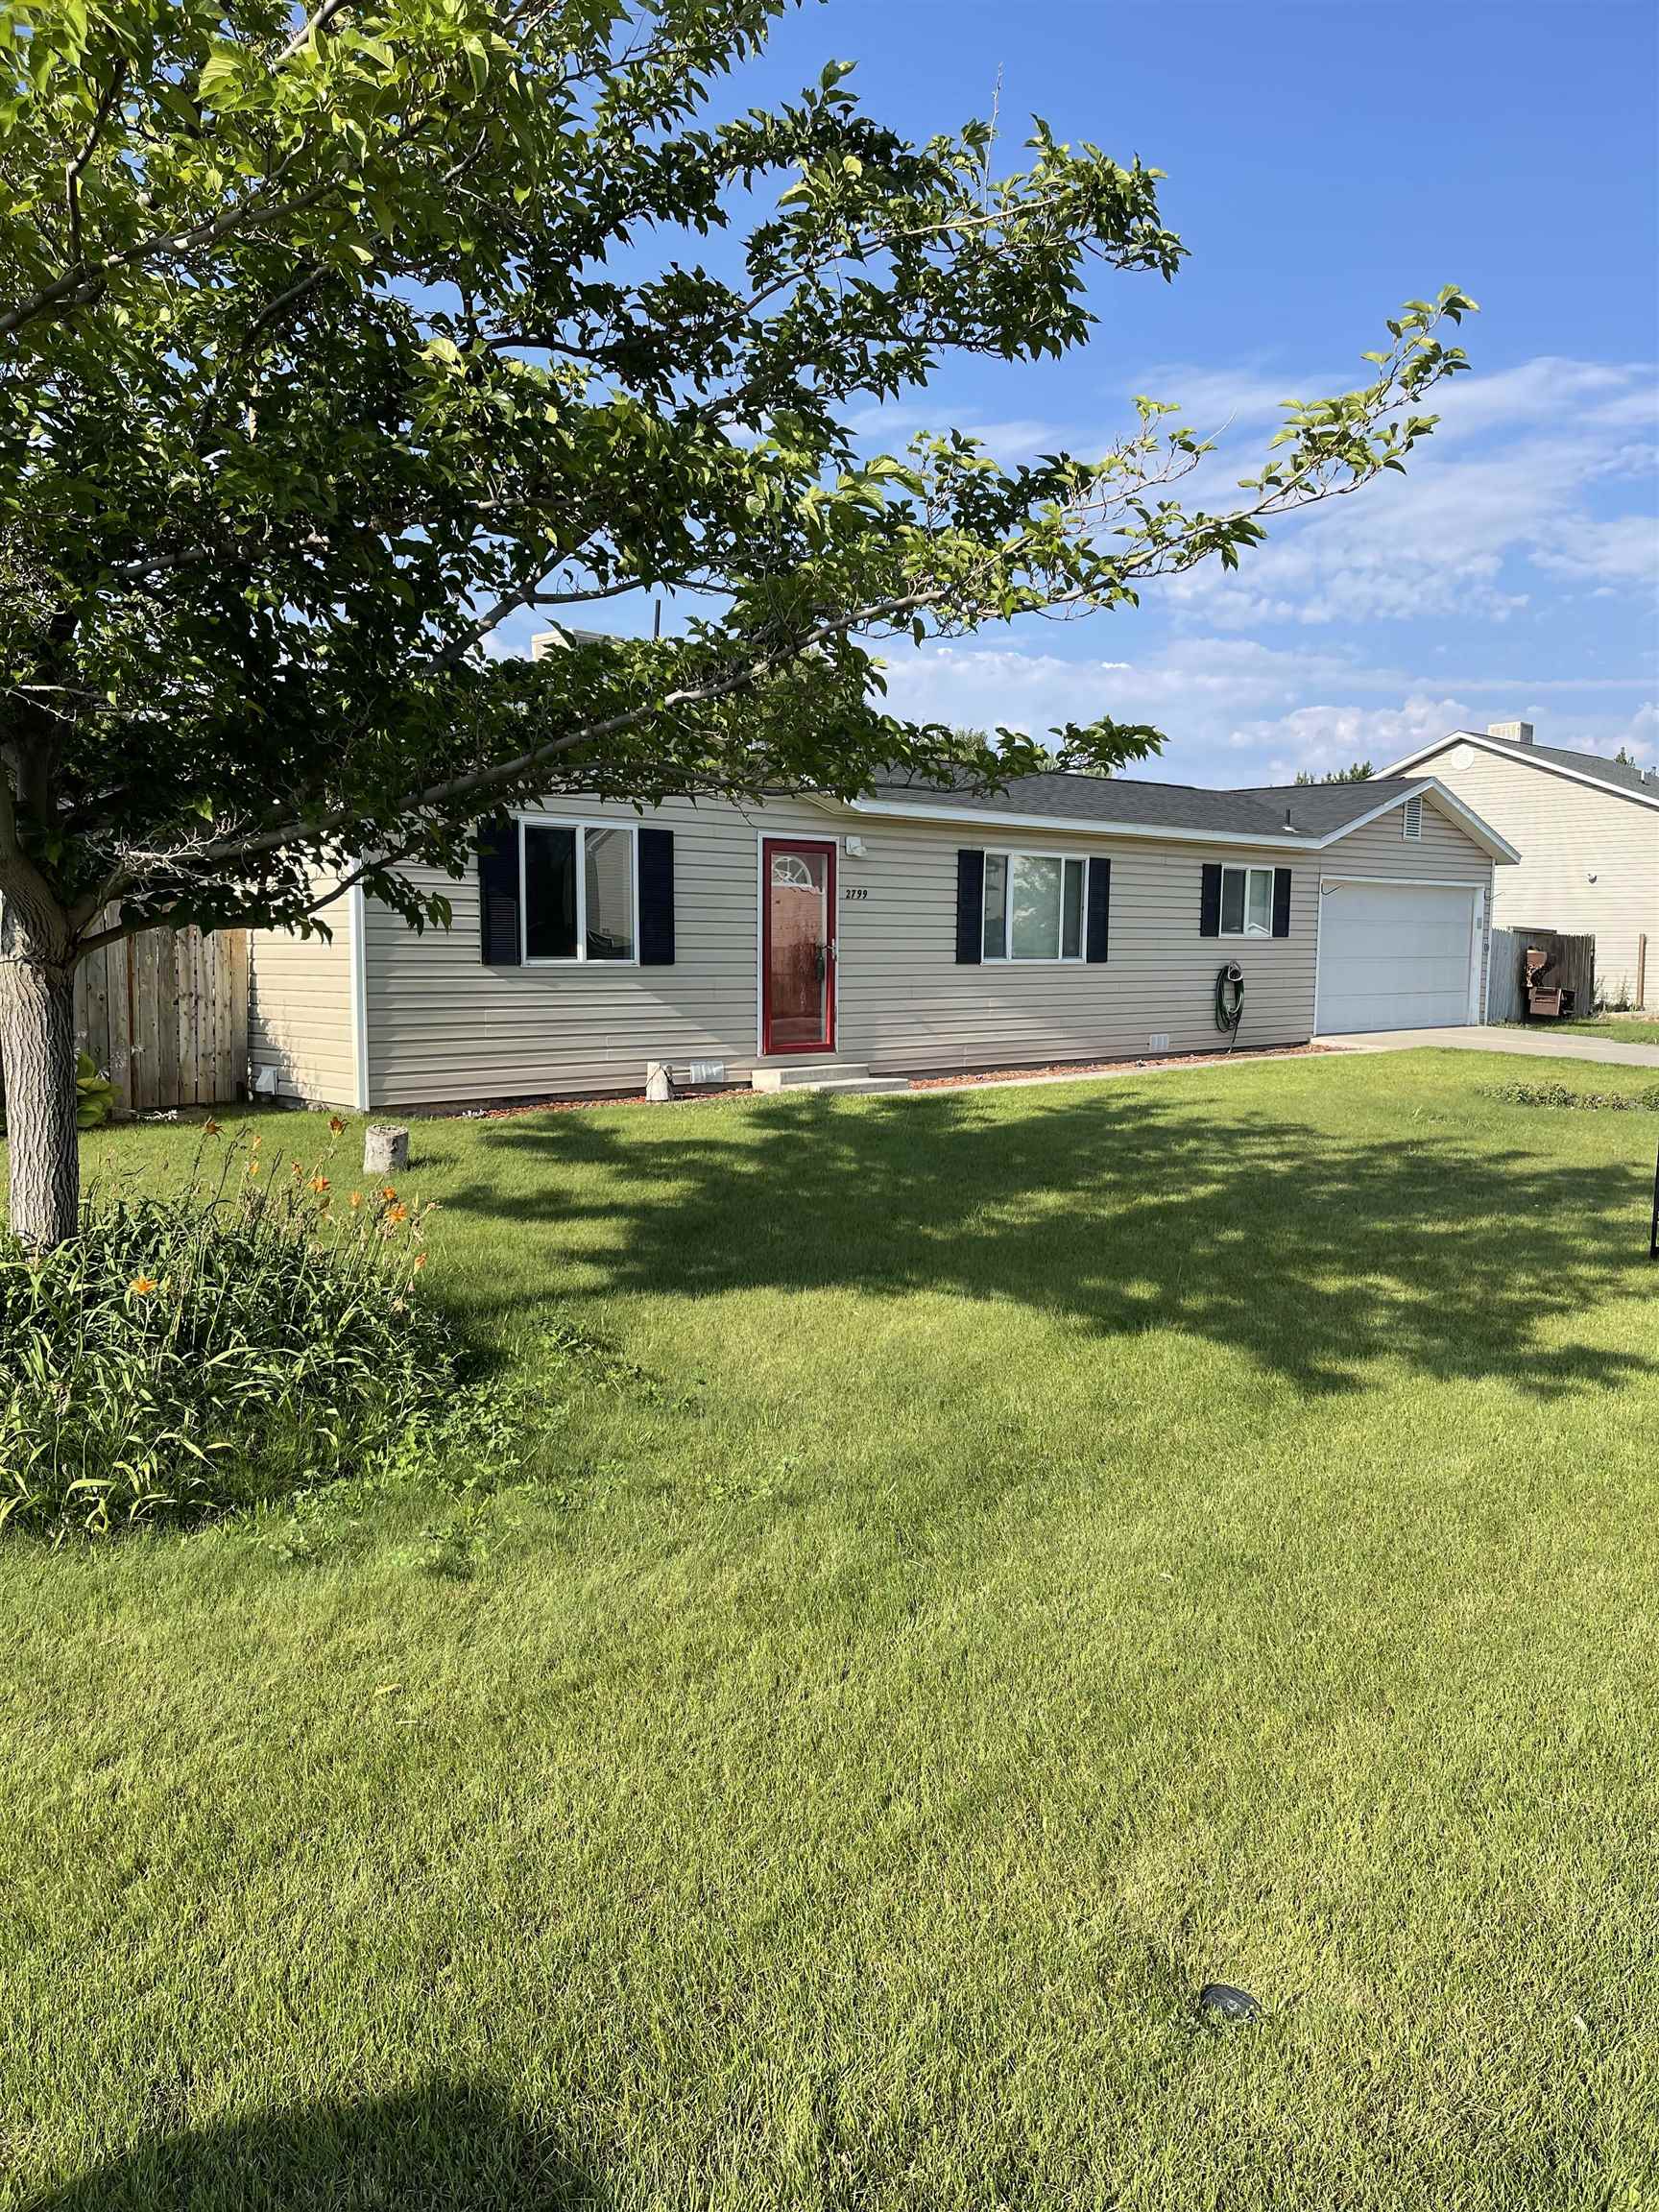 Nice, well kept 2 bed, 1 bath home on .23 of an acre. In Village Nine neighborhood. Home has an updated roof, an evaporative cooler. Nice backyard covered porch with good landscaping, with a good sized yard, and plenty of RV parking with a shed.